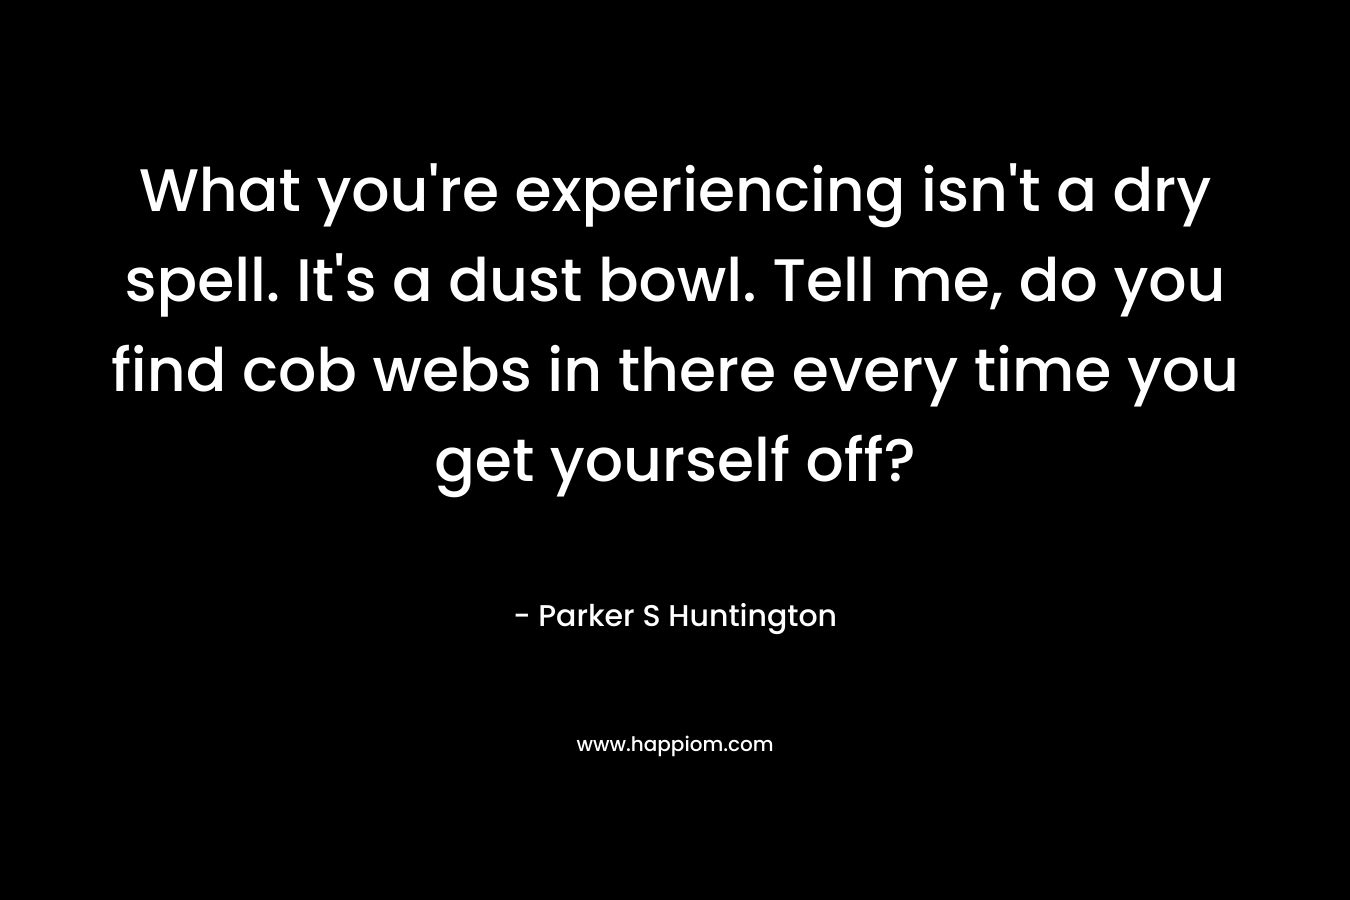 What you're experiencing isn't a dry spell. It's a dust bowl. Tell me, do you find cob webs in there every time you get yourself off?